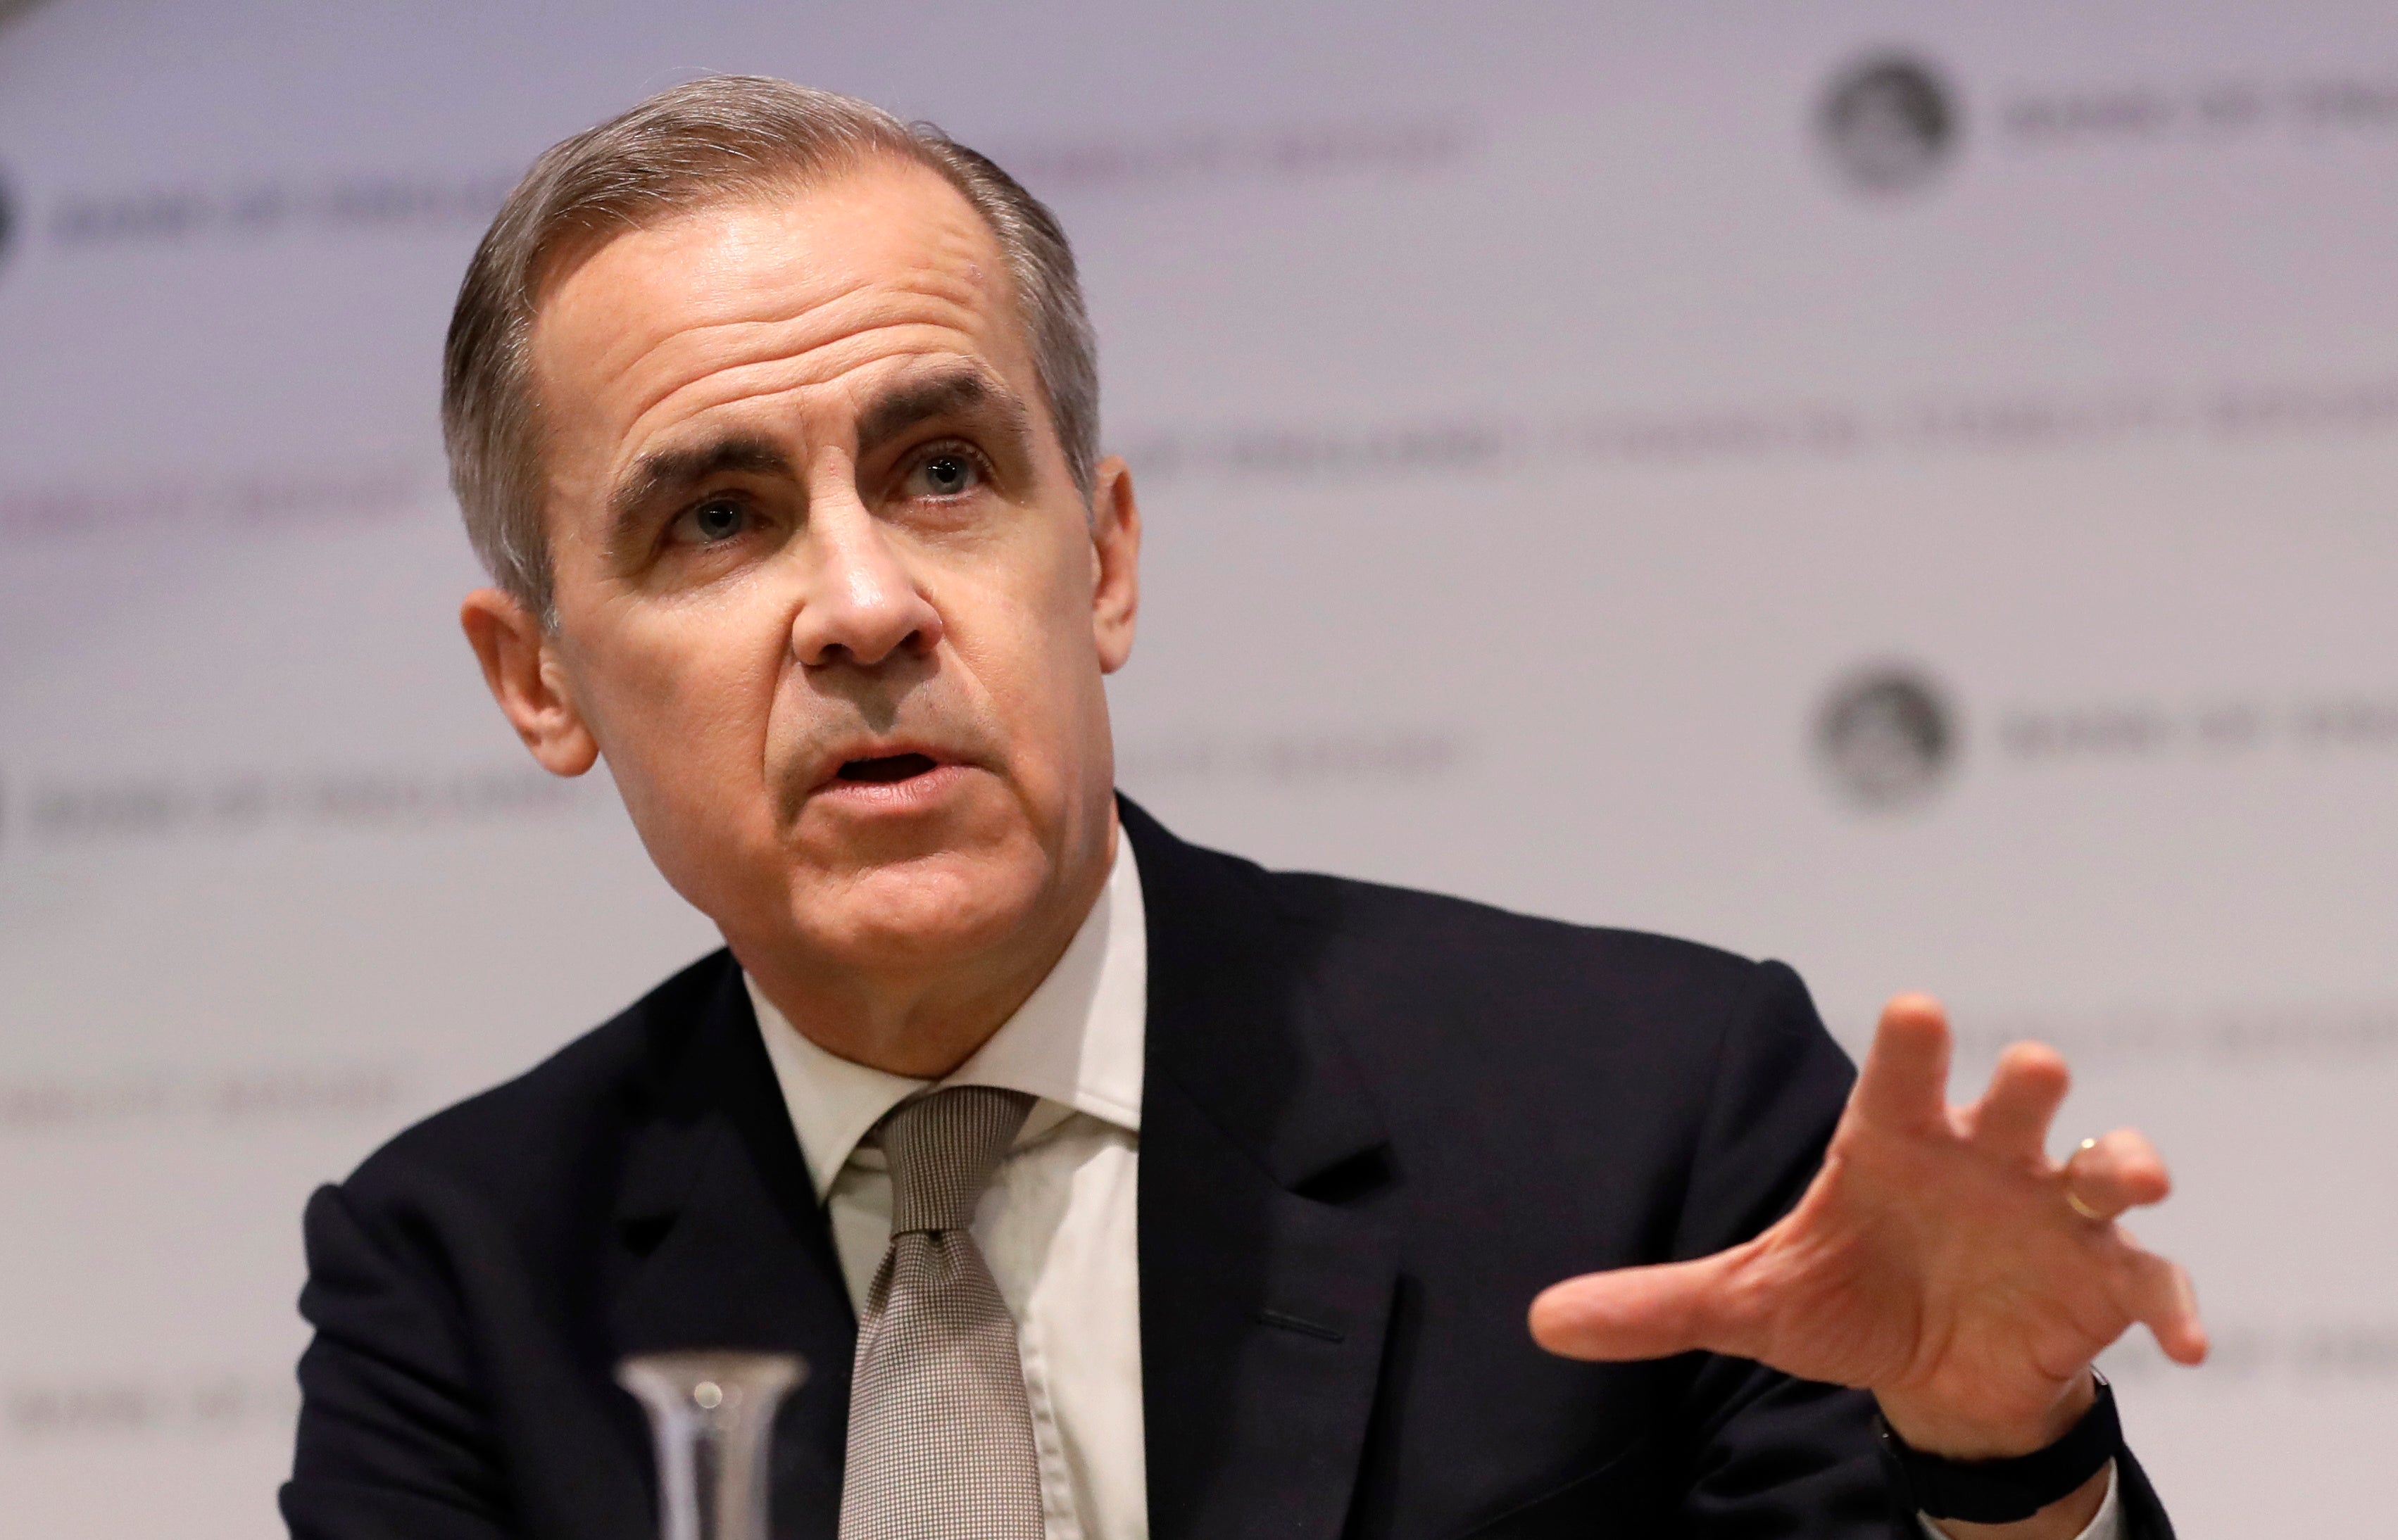 ‘Carney has said that owning renewables did not wipe out the carbon emitted by their fossil fuel holdings – but this raises crucial questions’